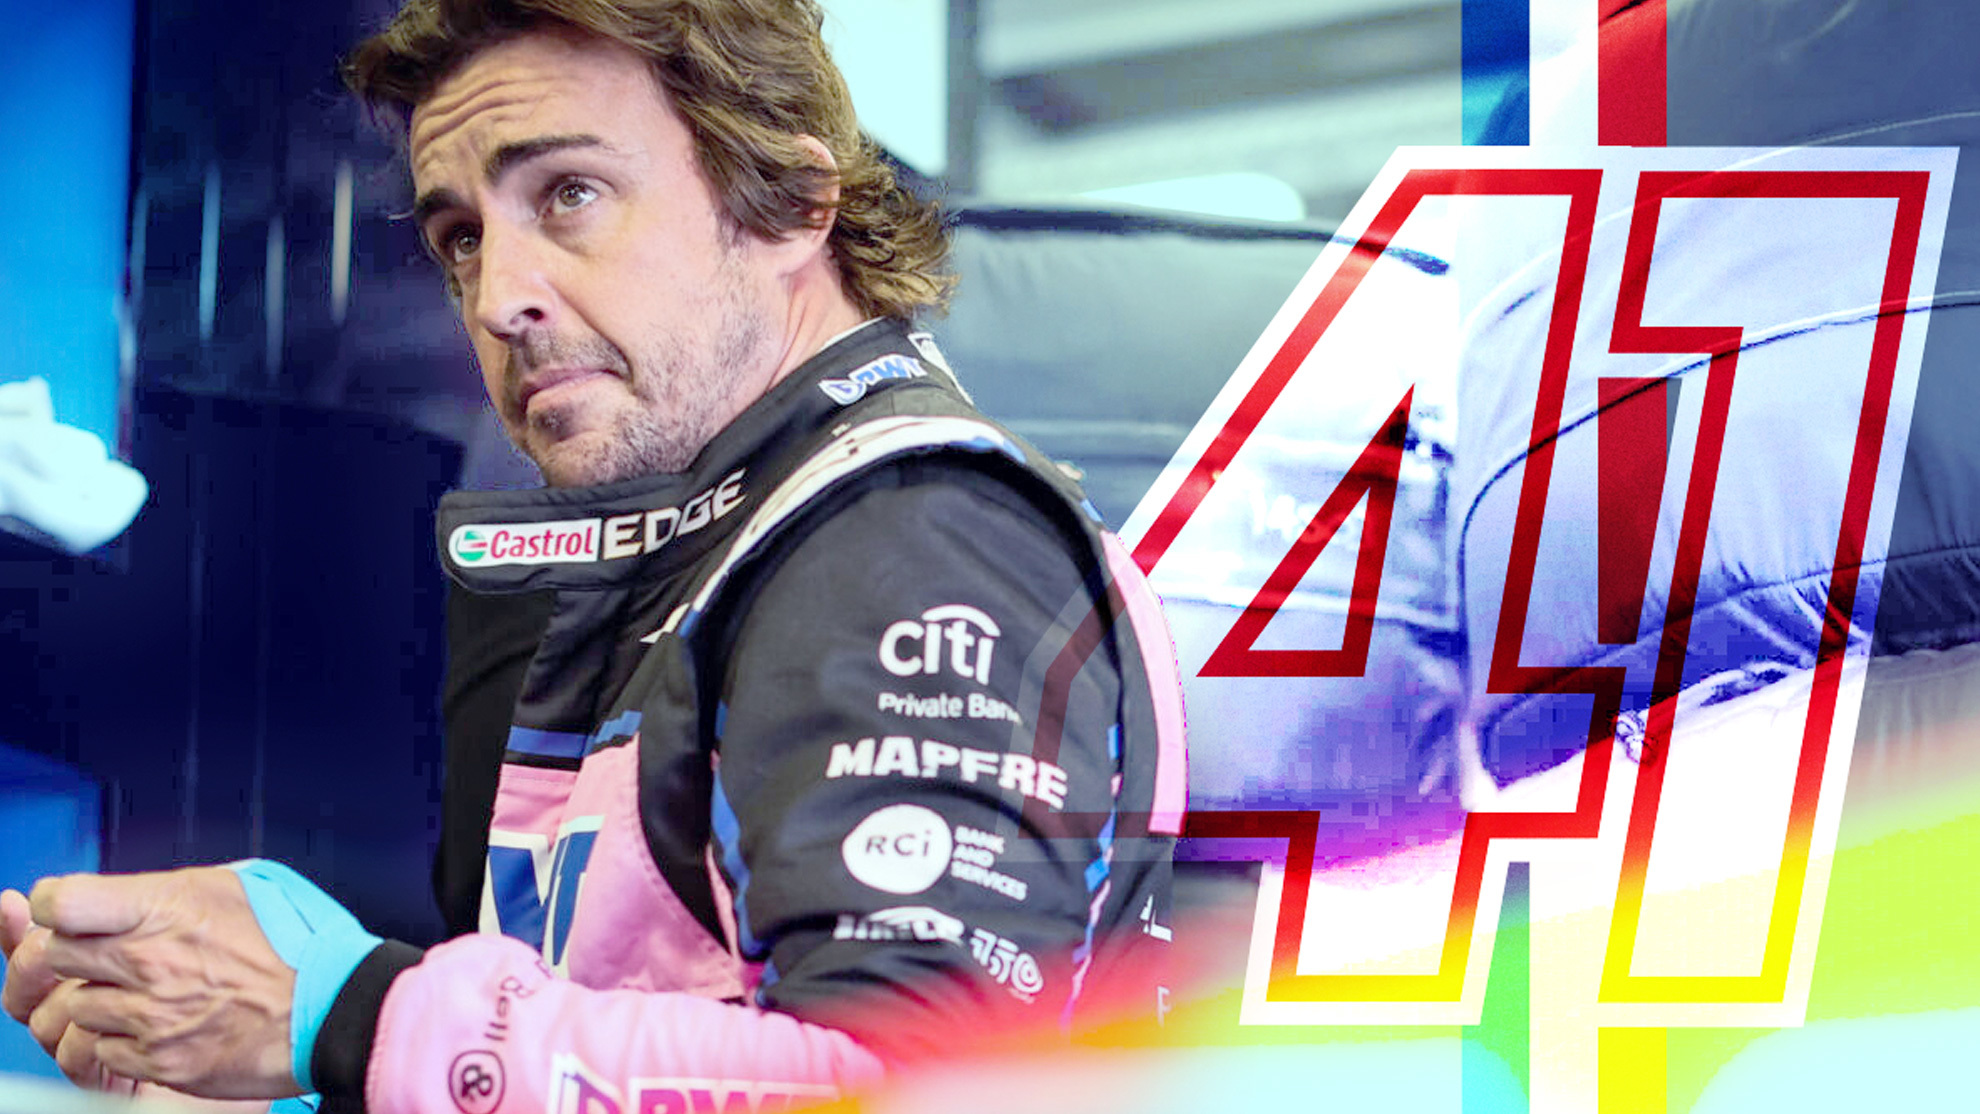 Fernando Alonso turns 41 in Hungary: Who is the oldest driver to win a GP?